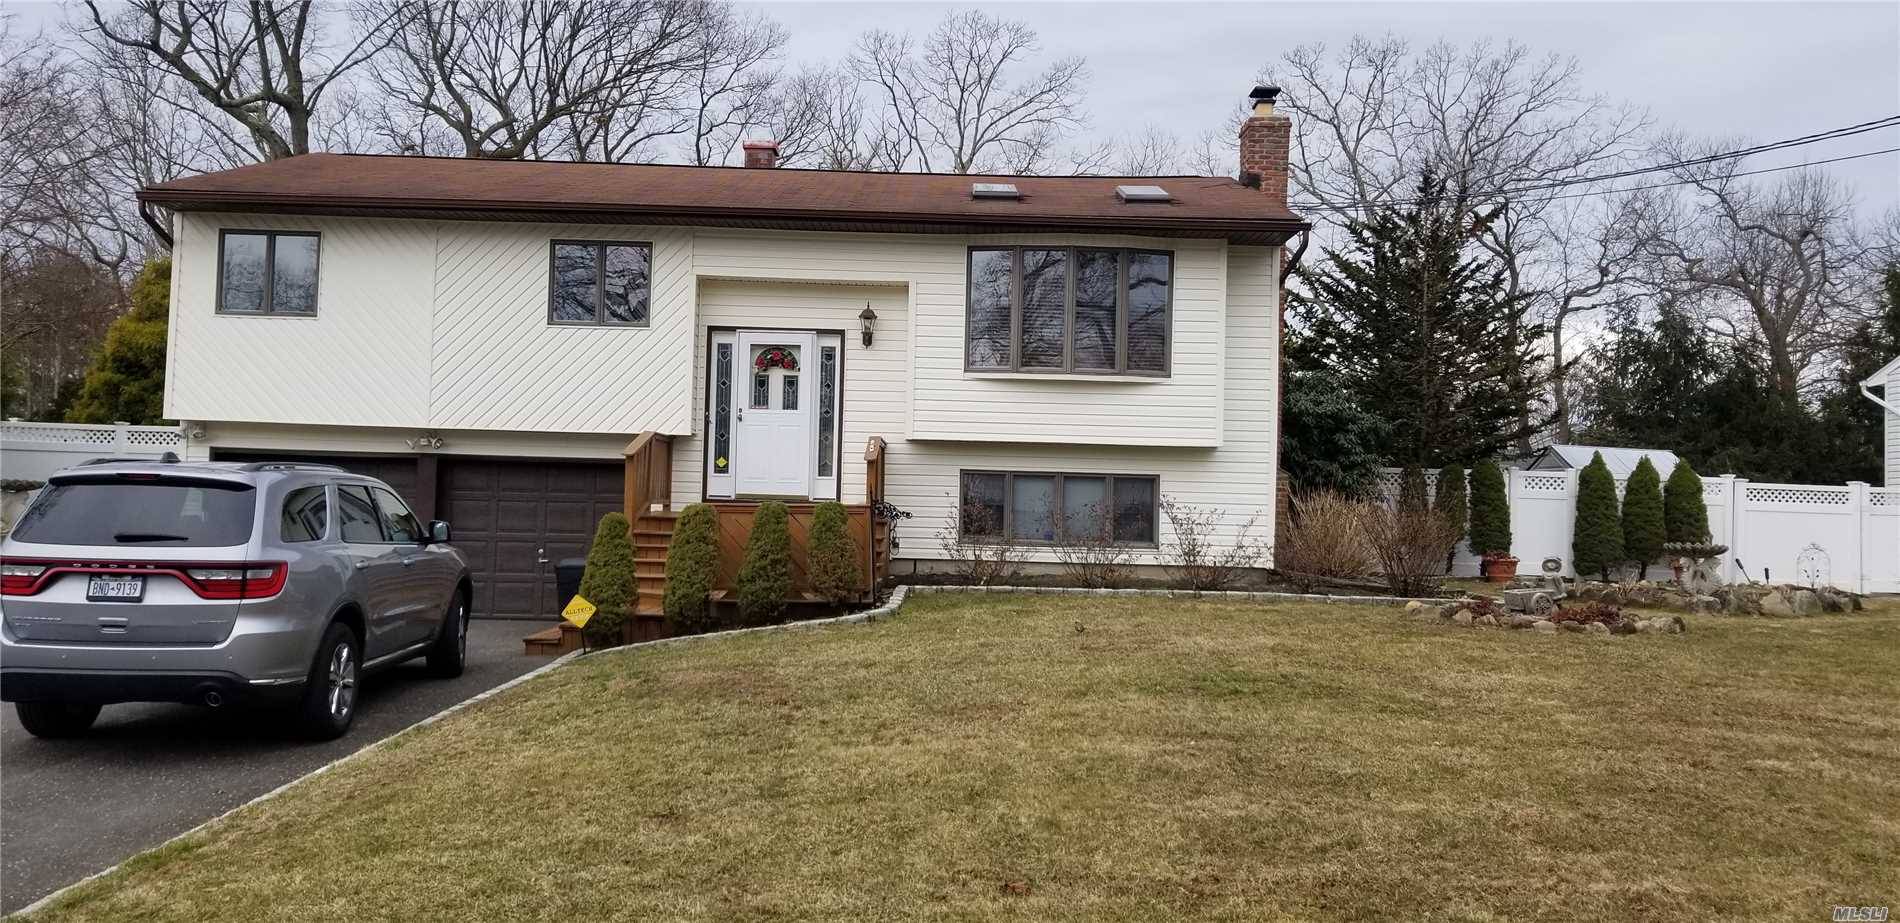 This home features Updated Eat in Kitchen, Hardwood Floors, Pull Down Attic, large deck Off The Kitchen, 3 Full Baths, Fireplace, 3 Skylights, Anderson Windows, Fence 1 Year Old, In ...